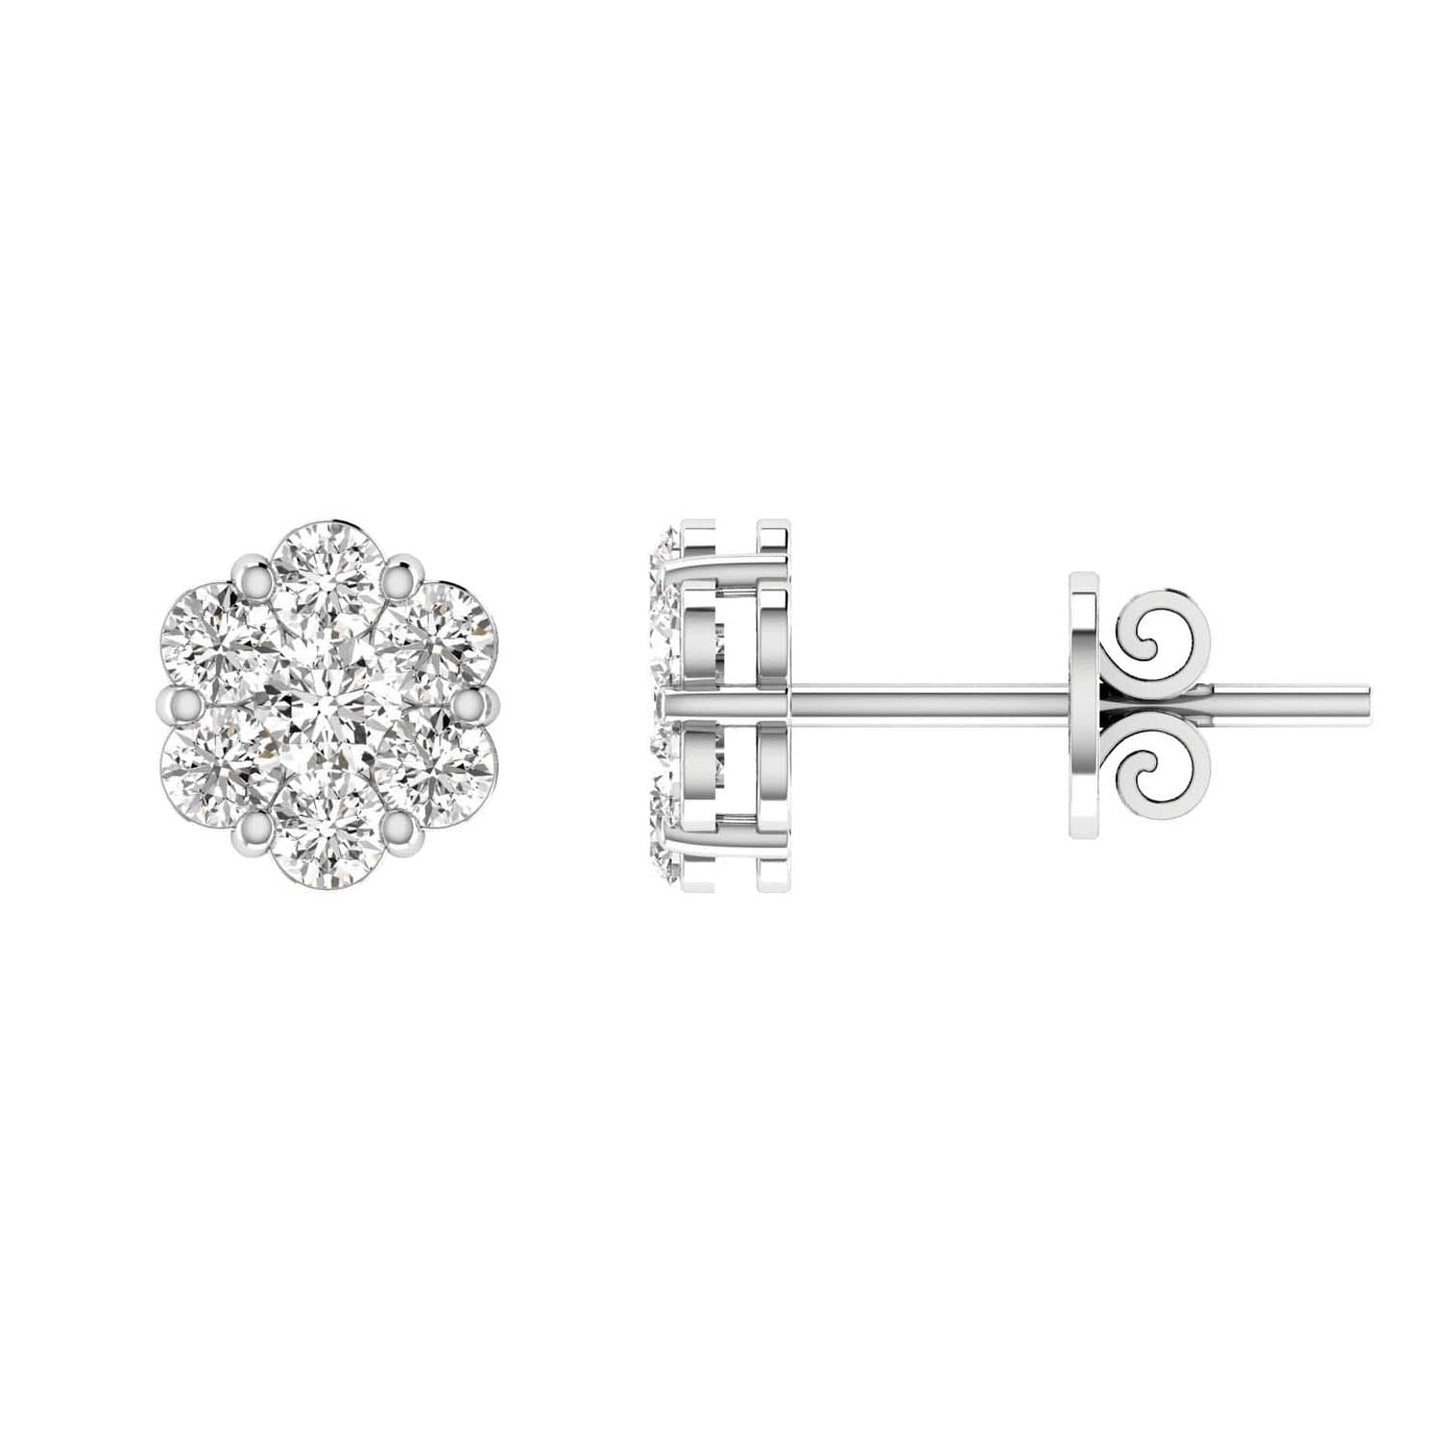 Cluster Stud Diamond Earrings with 1.00ct Diamonds in 9K White Gold - RJ9WECLUS100GH